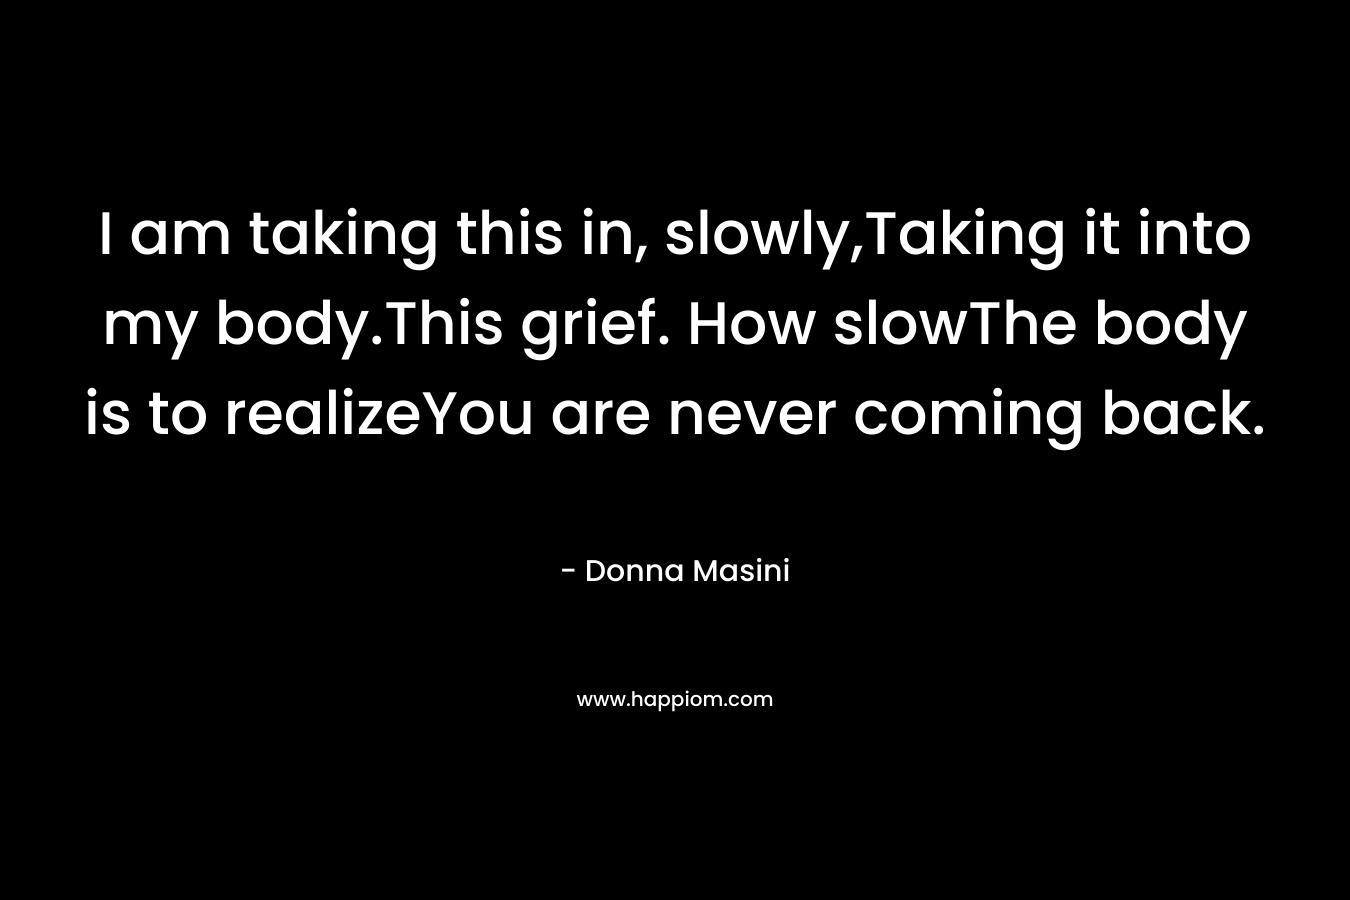 I am taking this in, slowly,Taking it into my body.This grief. How slowThe body is to realizeYou are never coming back.